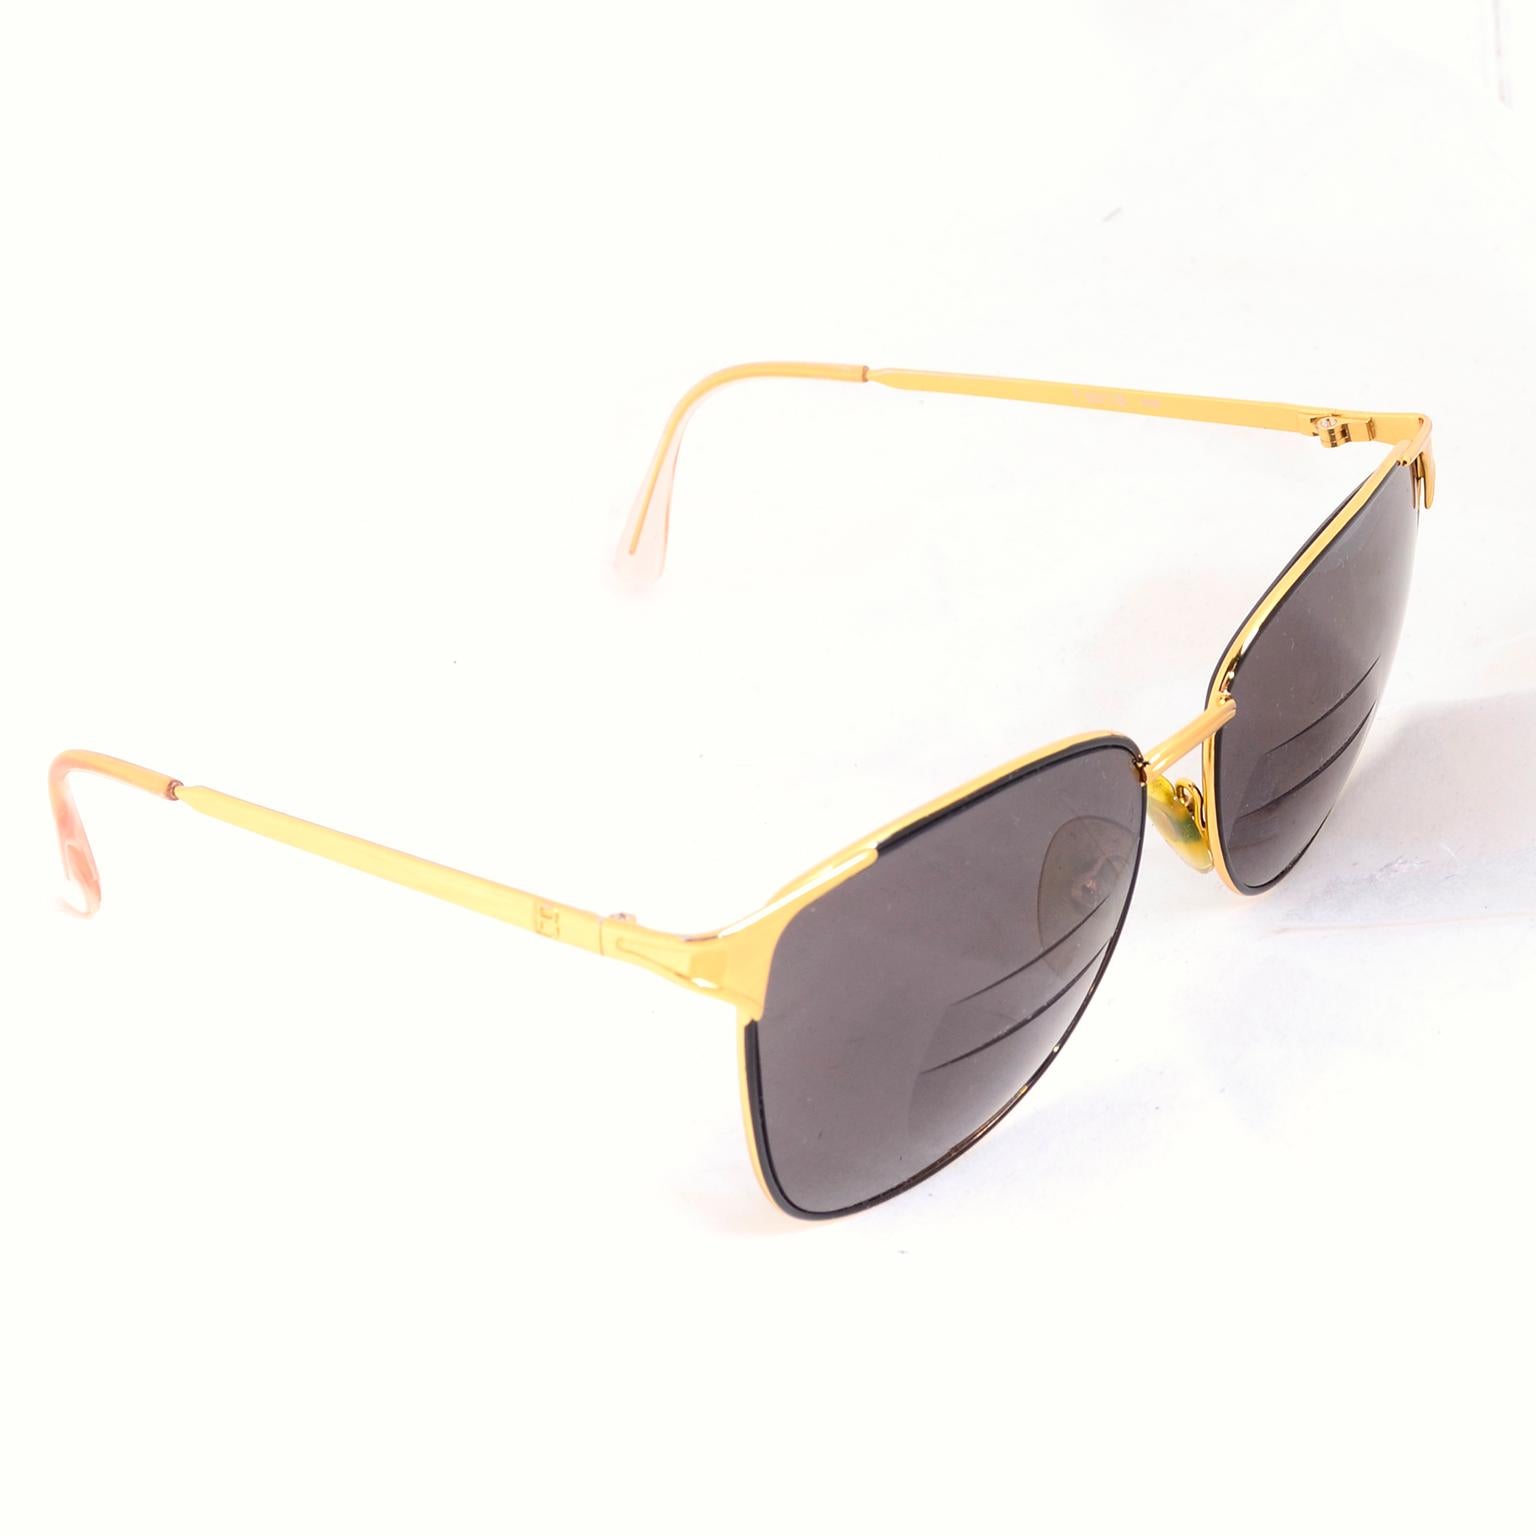 Laura Biagiotti Gold Rim Vintage Sunglasses Frames In Excellent Condition For Sale In Portland, OR